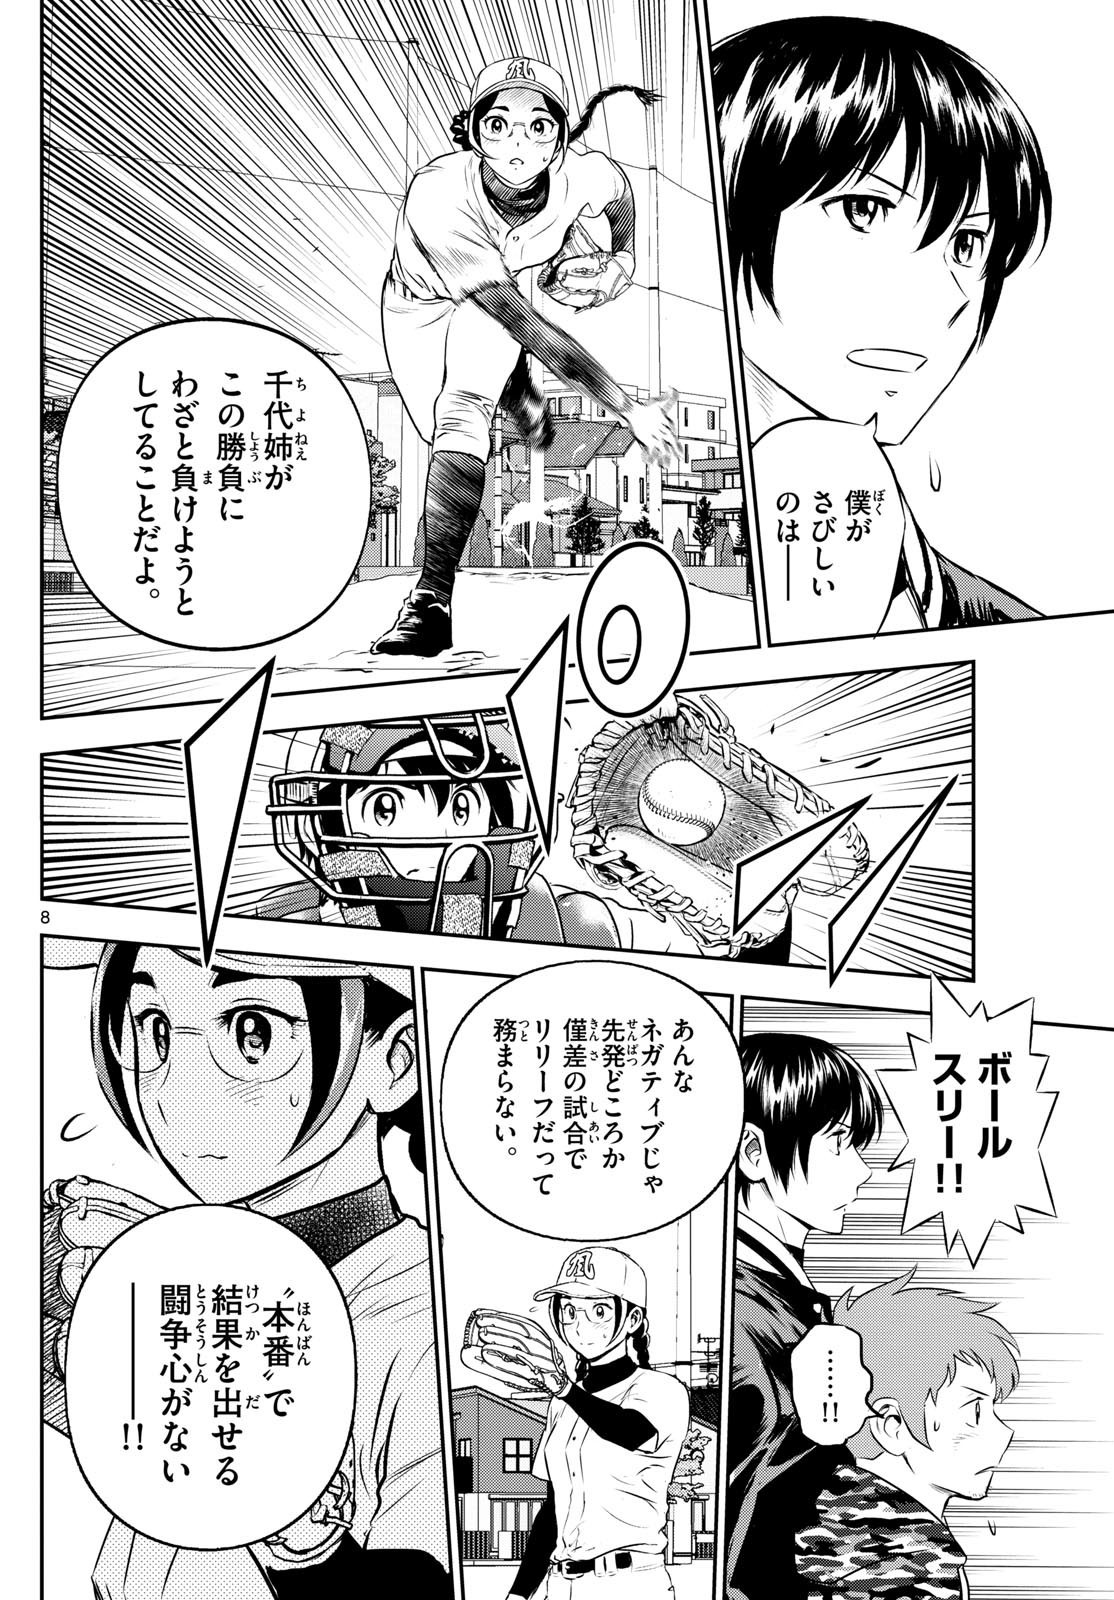 Major 2nd - メジャーセカンド - Chapter 282 - Page 8